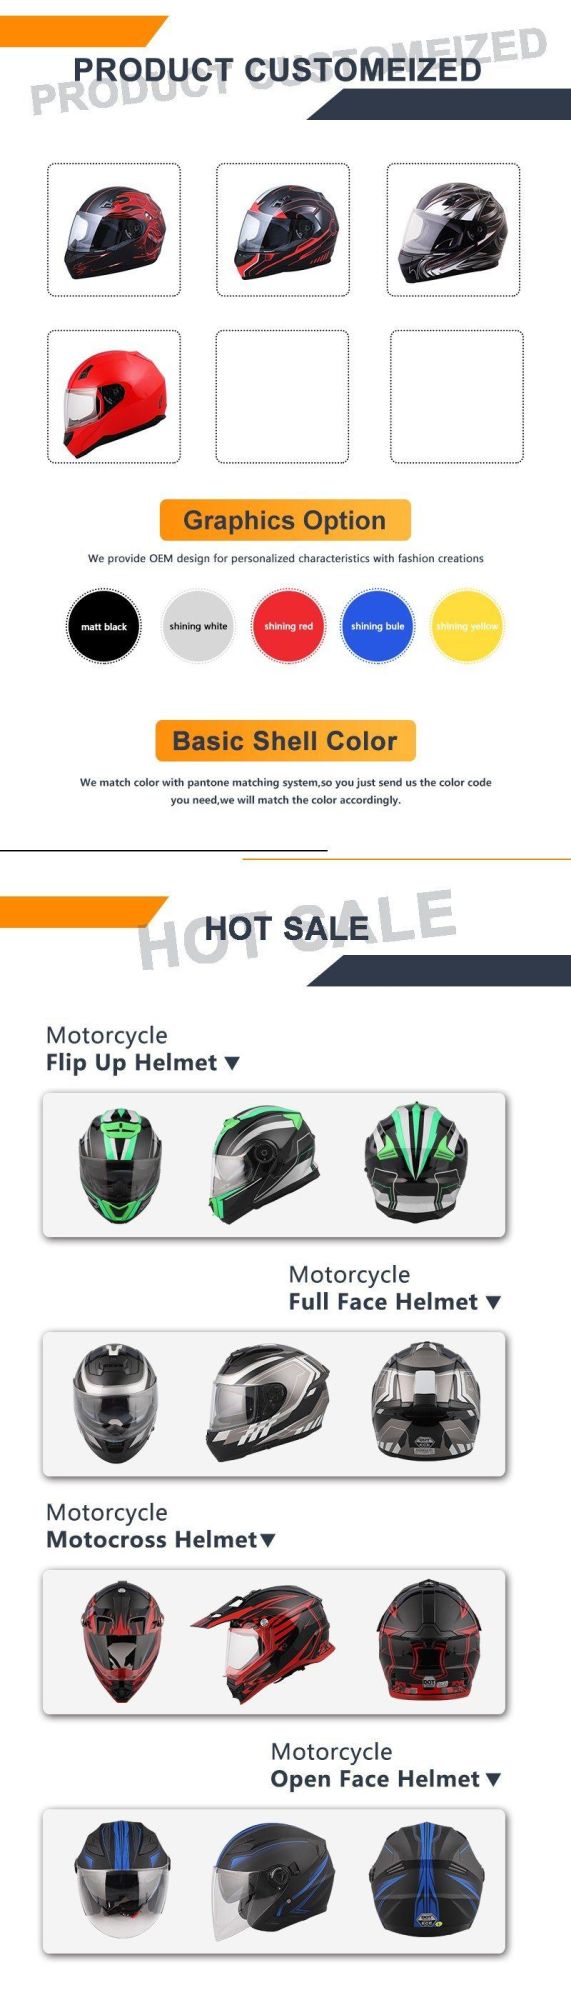 Motorcycle Open Face Helmet, ECE/DOT ABS Sports Safety Full Face Motorcycle Helmet